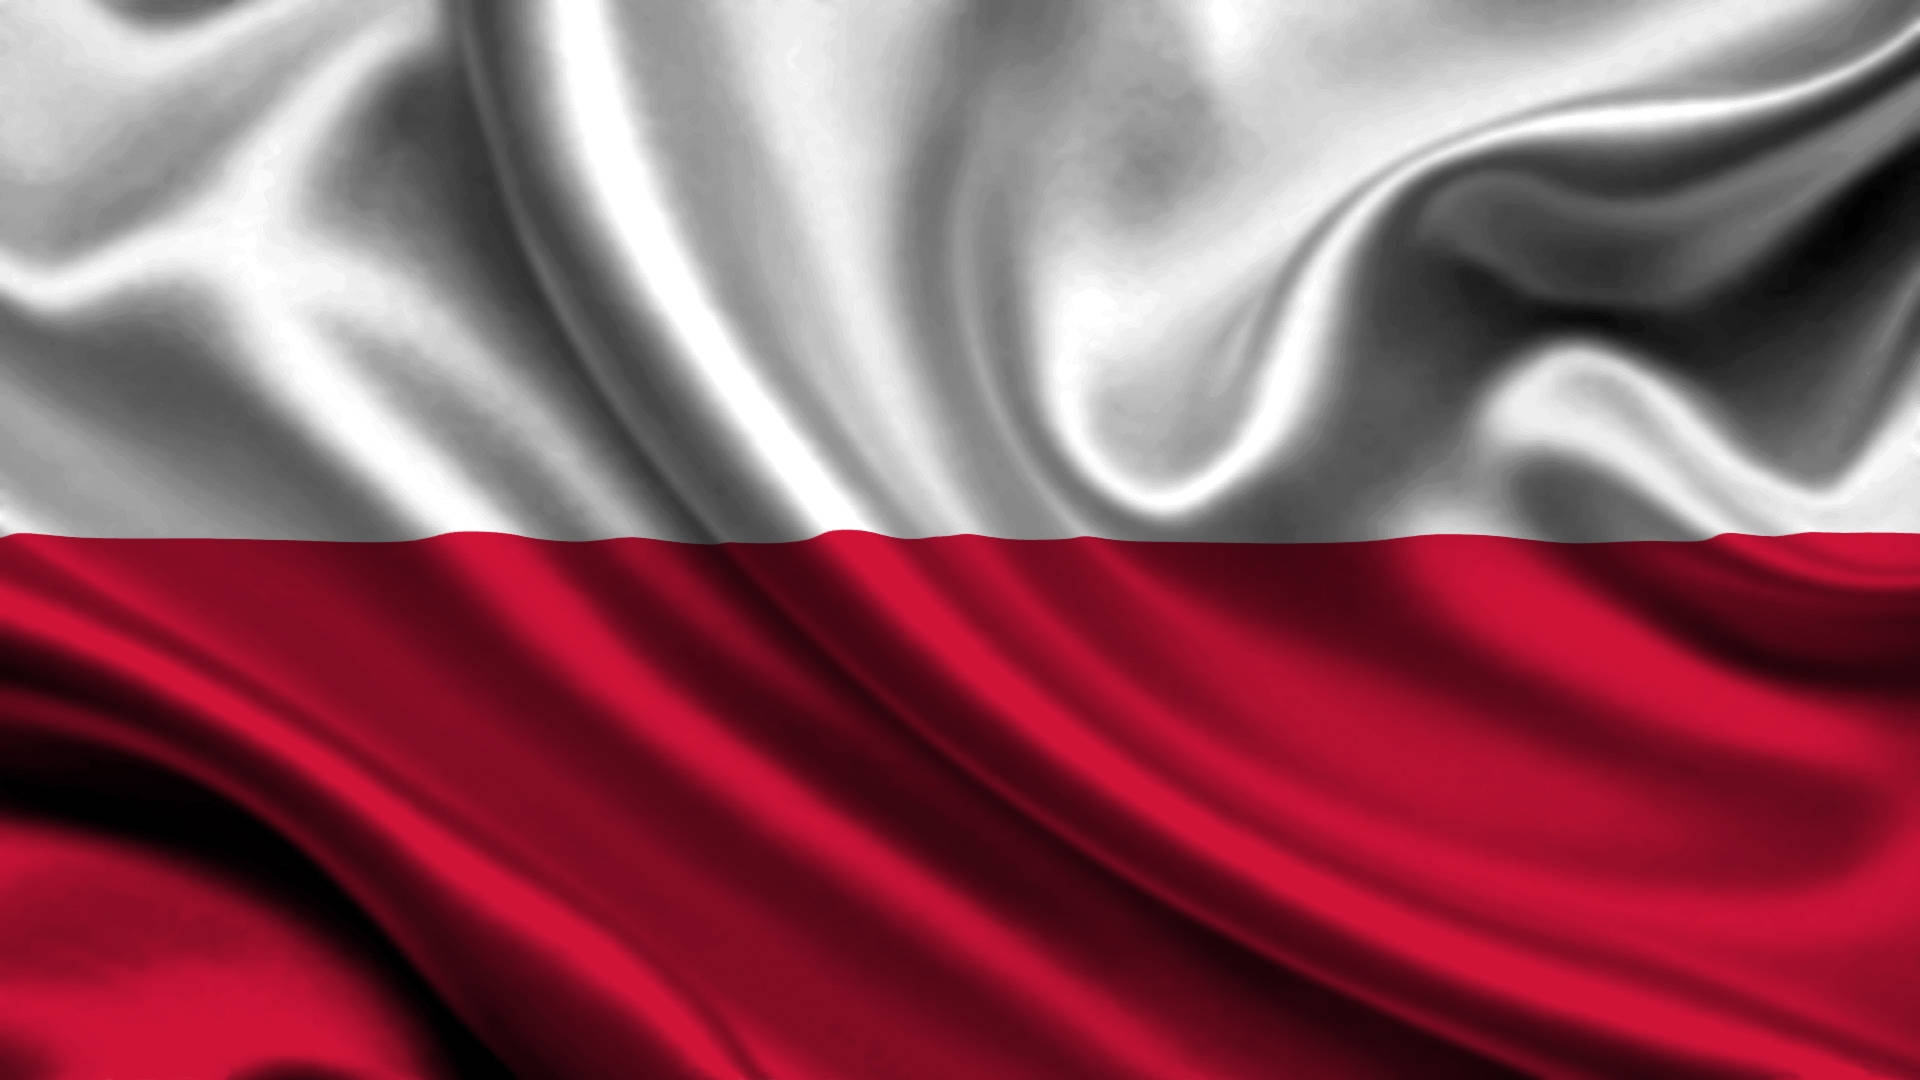 The Glorious Flag Of Poland Unfurled Background